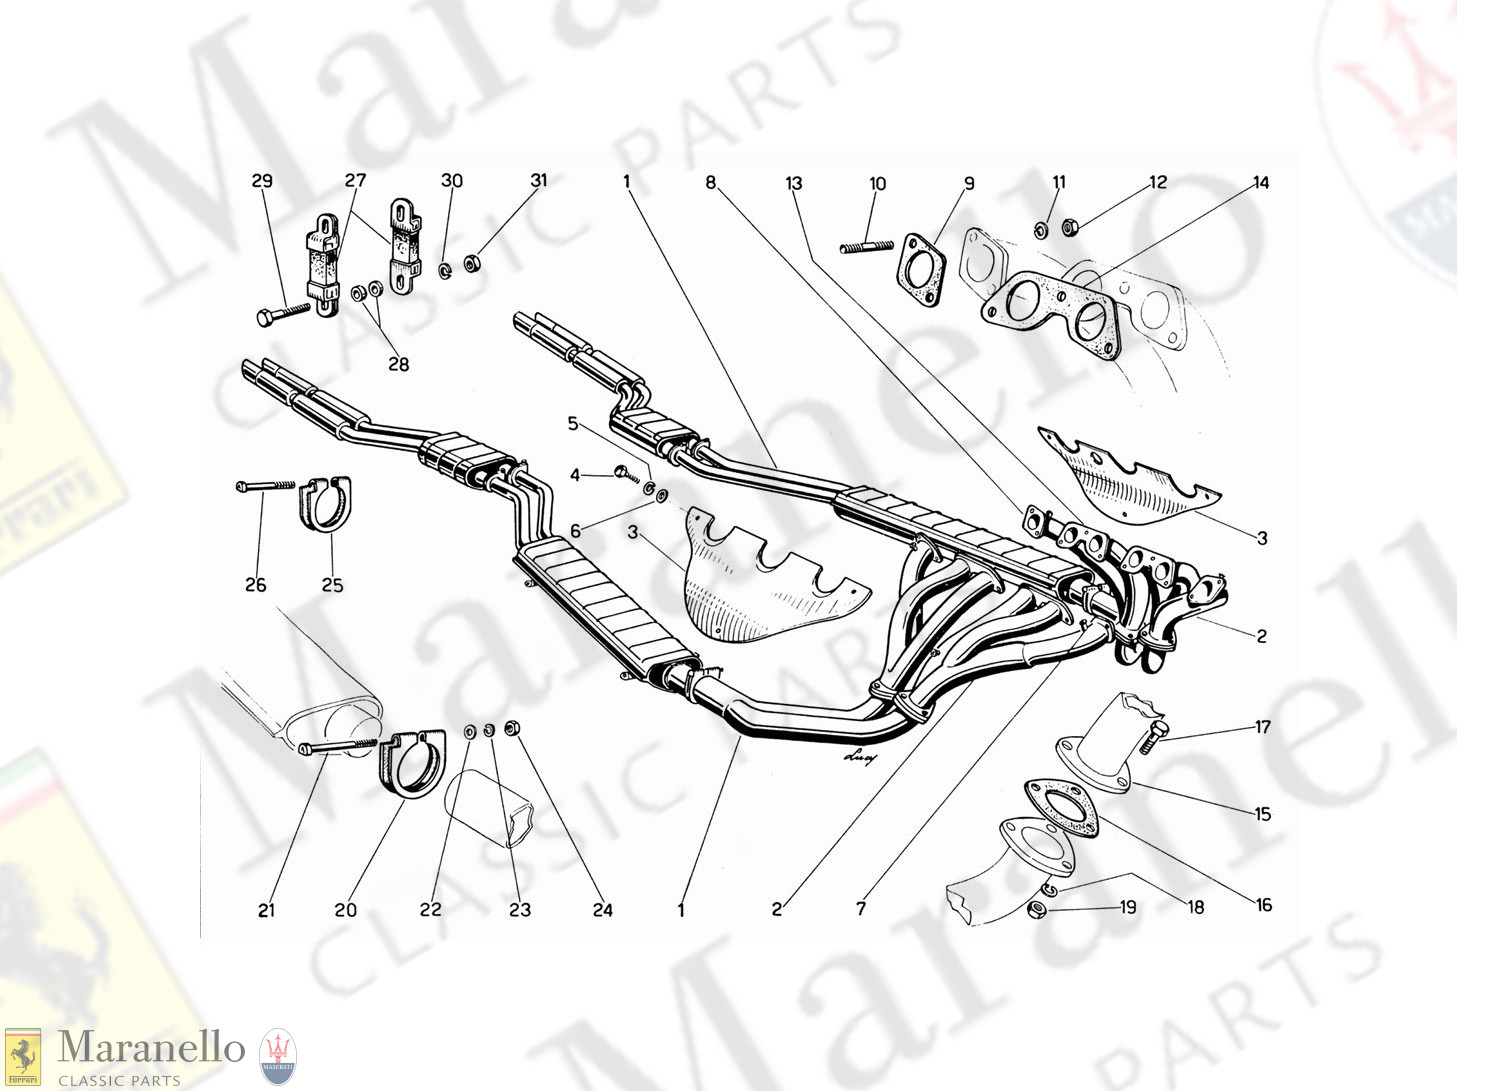 009 - Exhaust Manifolds, Silencers And Extensions